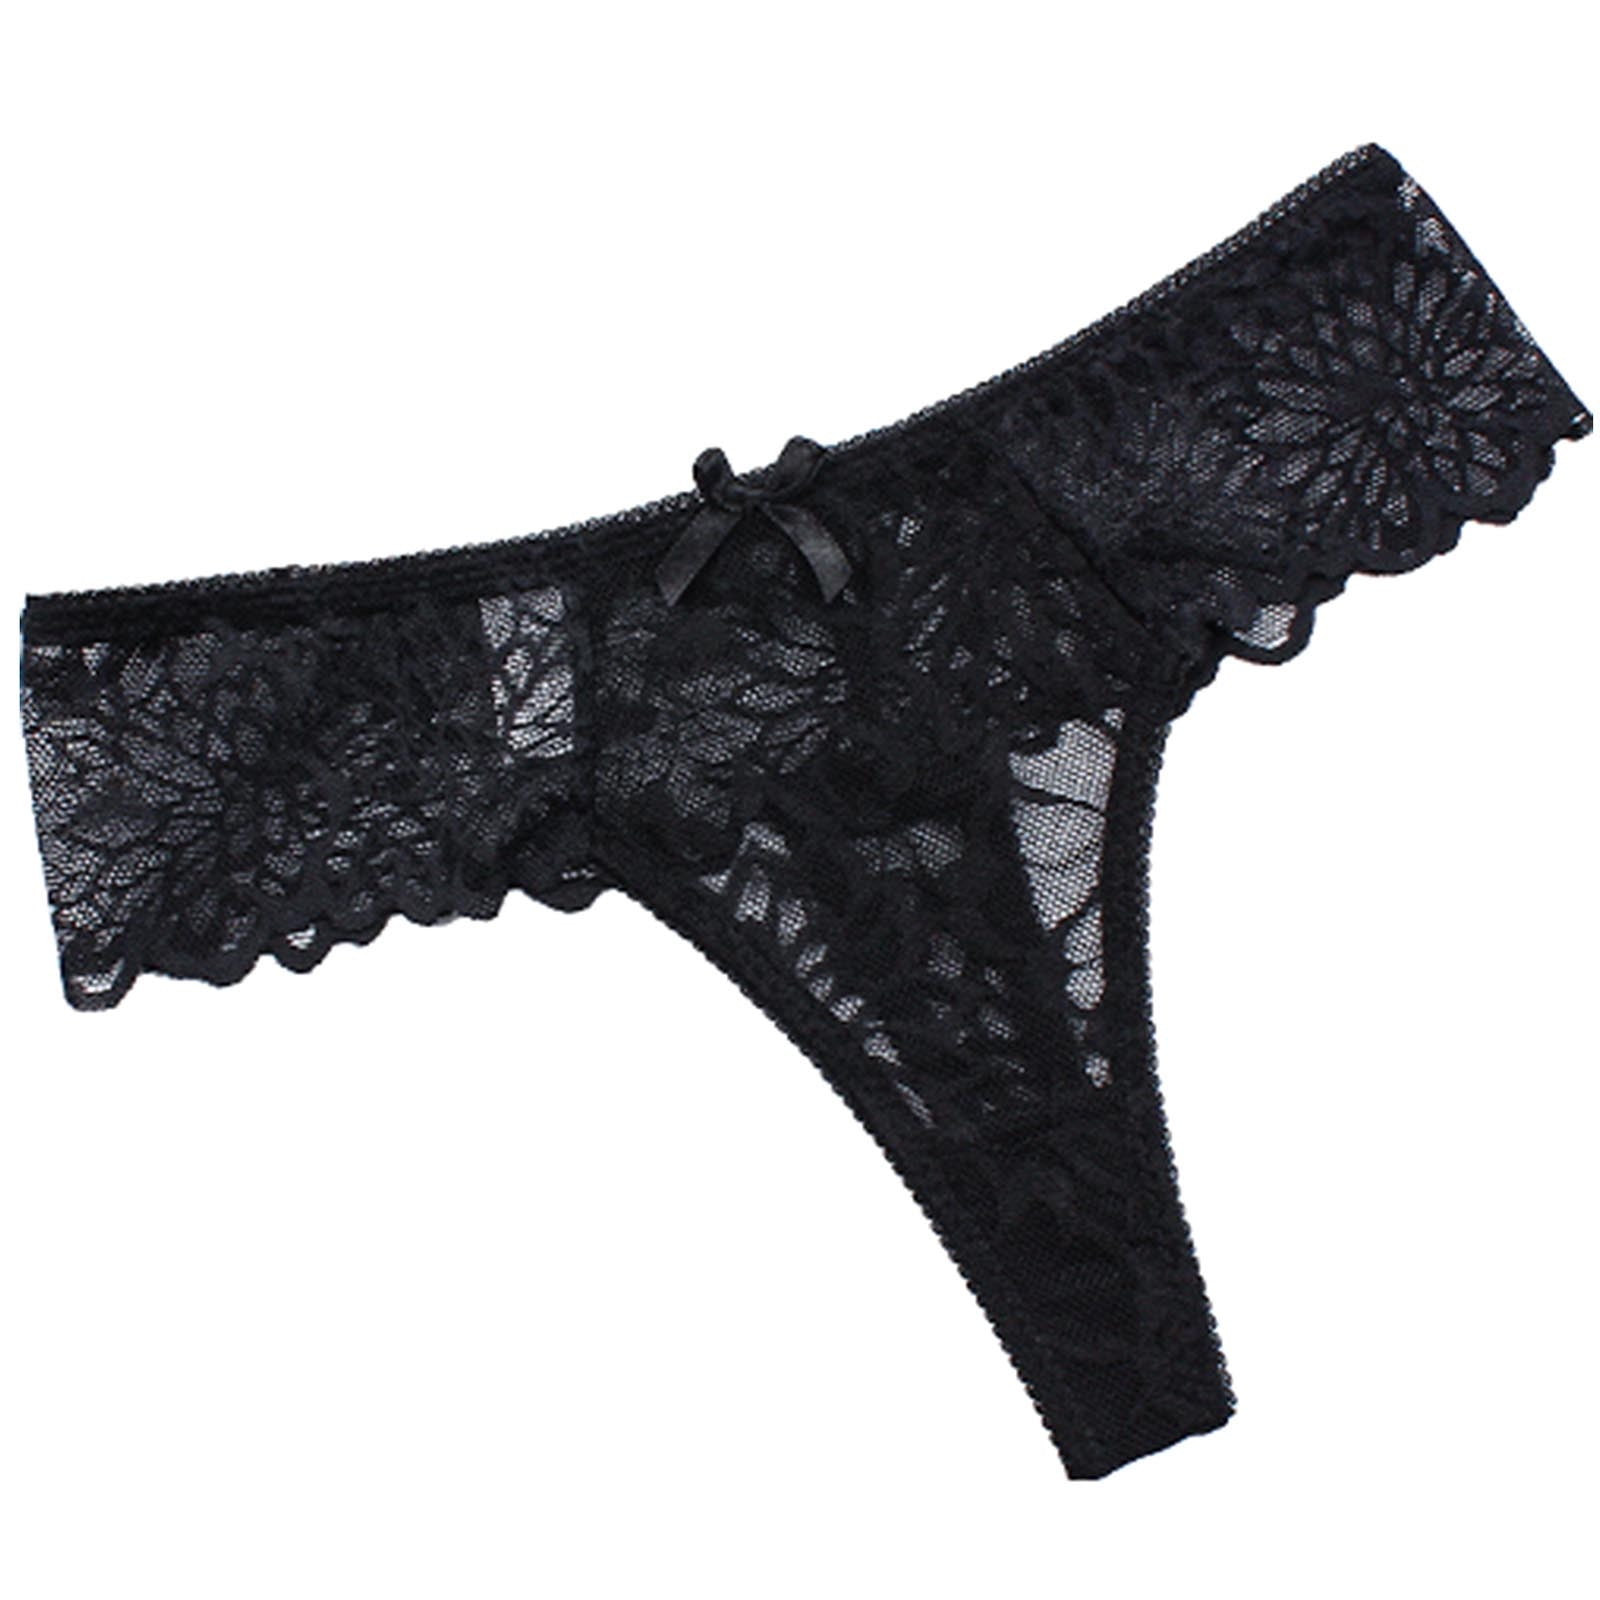 YWDJ Lace Underwear for Women Women Lace See-Through Breathable